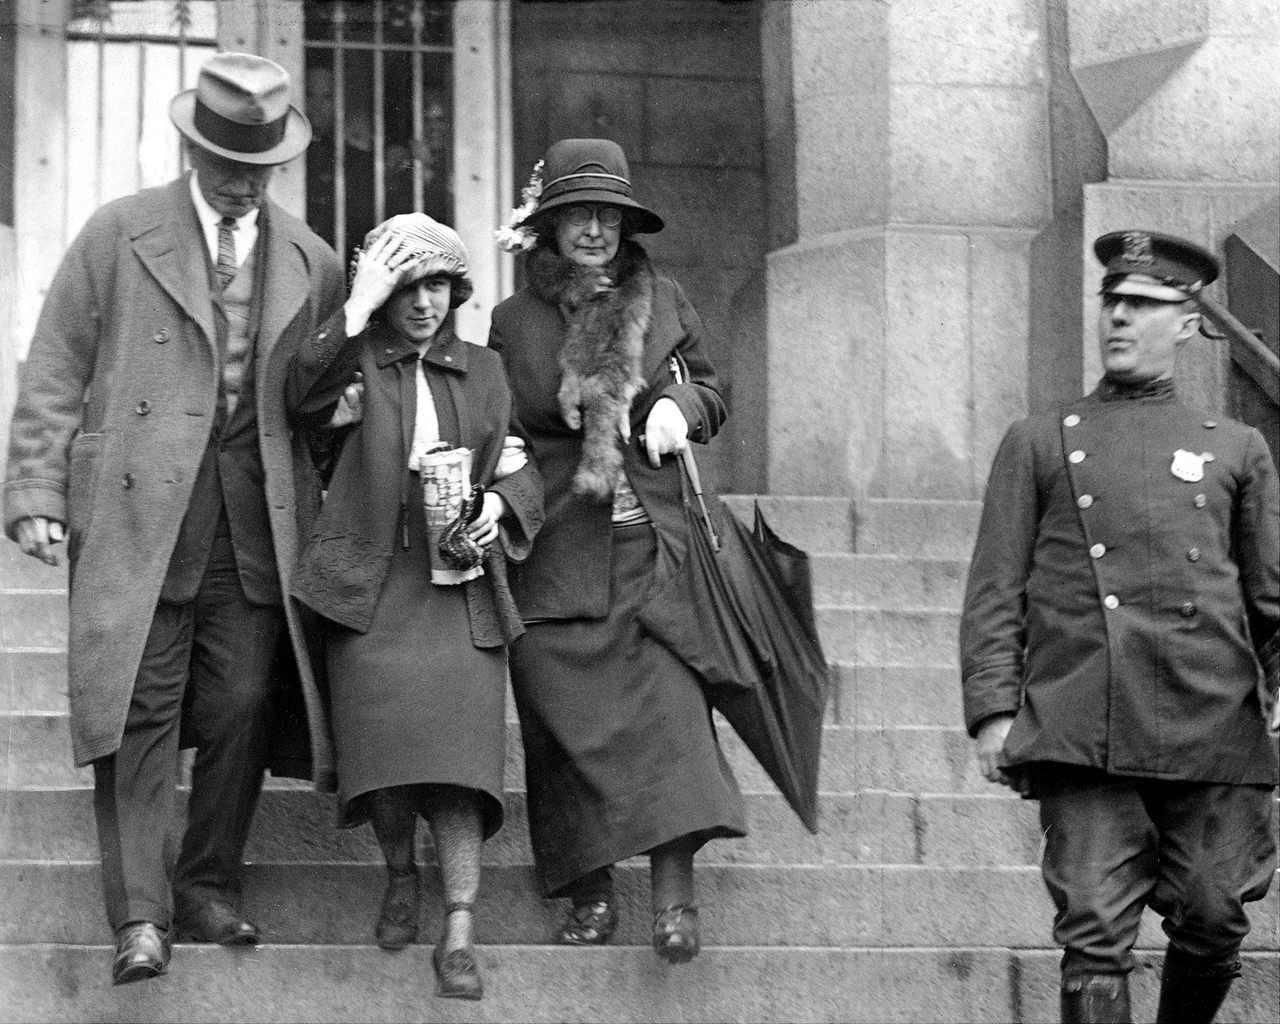 Celia Cooney, the infamous Bobbed Haired Bandit, was a symbolic figure of female empowerment in the 1920s. Here, she is seen leaving the courthouse.